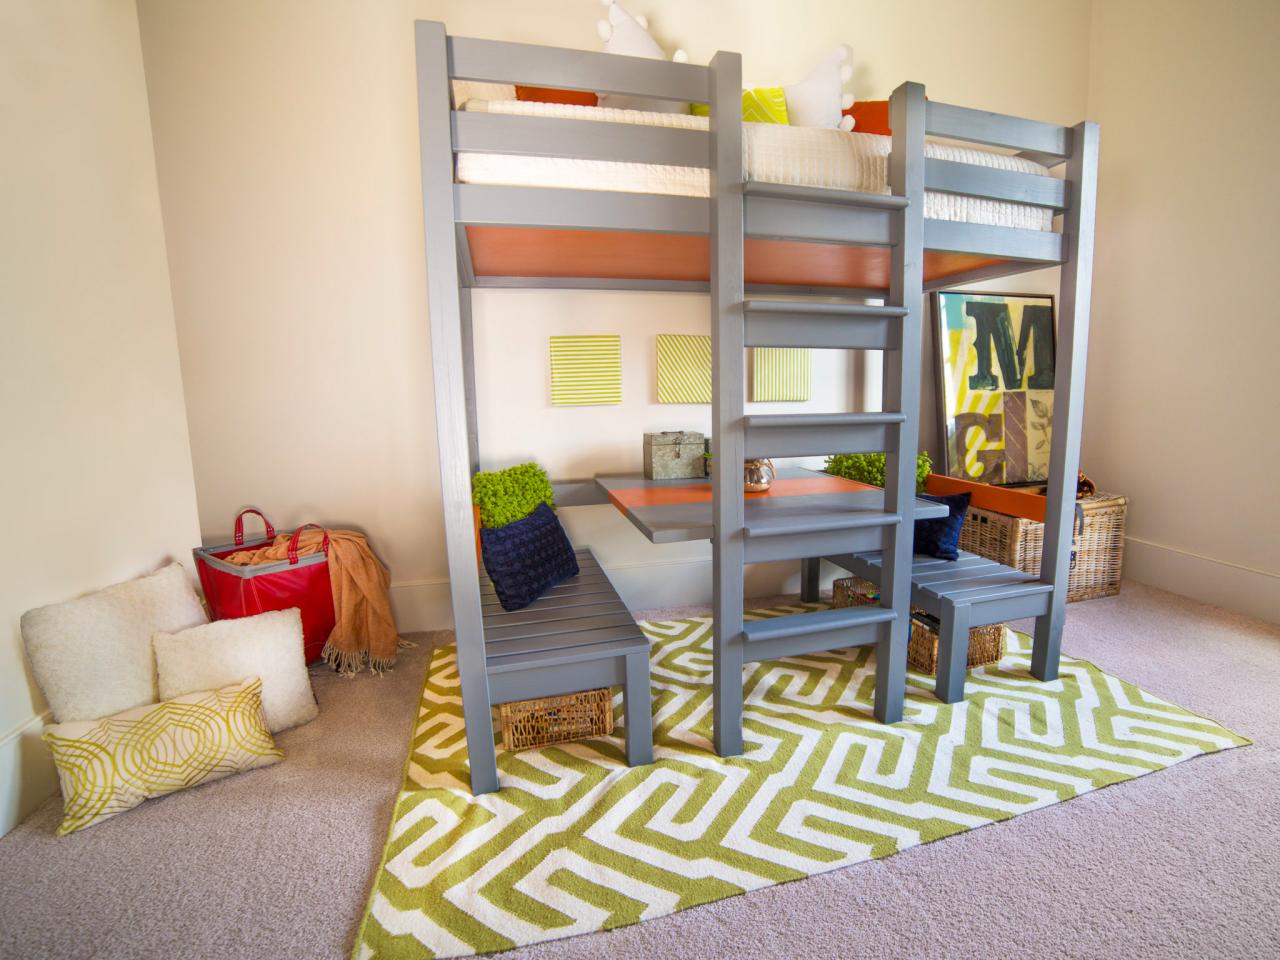 How To Build A Loft Bed With Built In, Bunk Bed With Seating Underneath